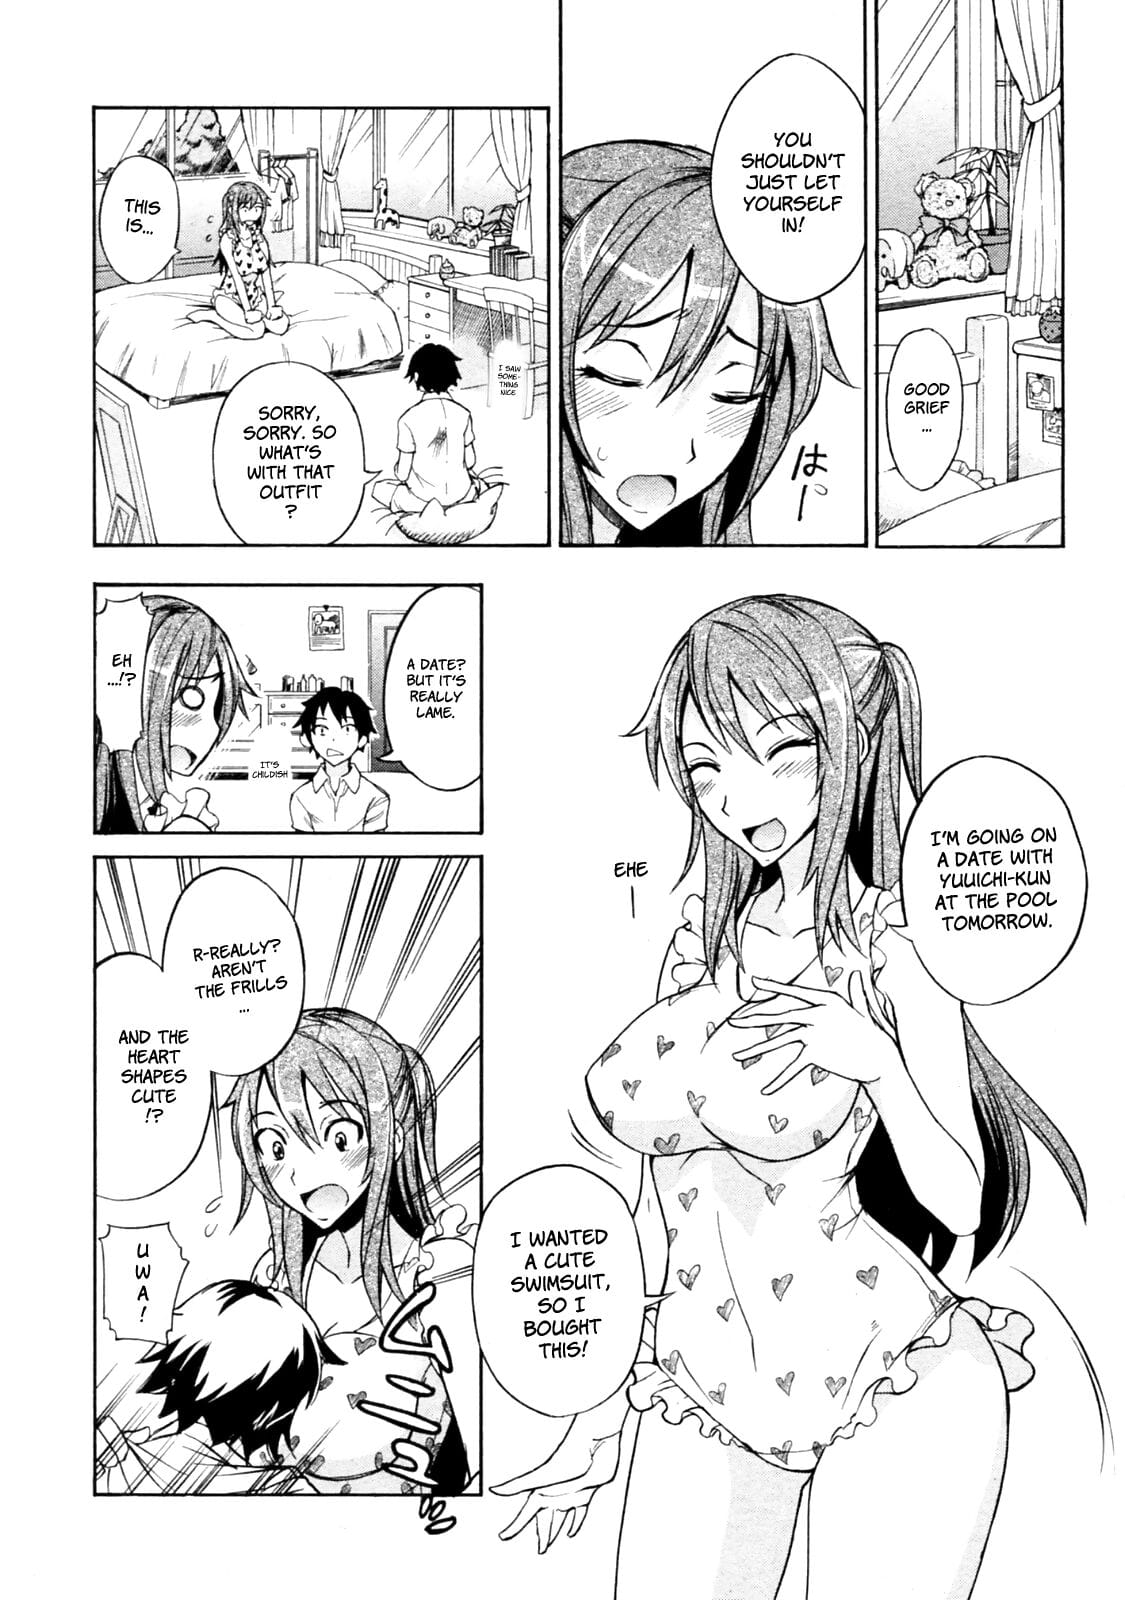 Mizugi to Onee-chan! - Swimsuit and Onee-chan! page 1